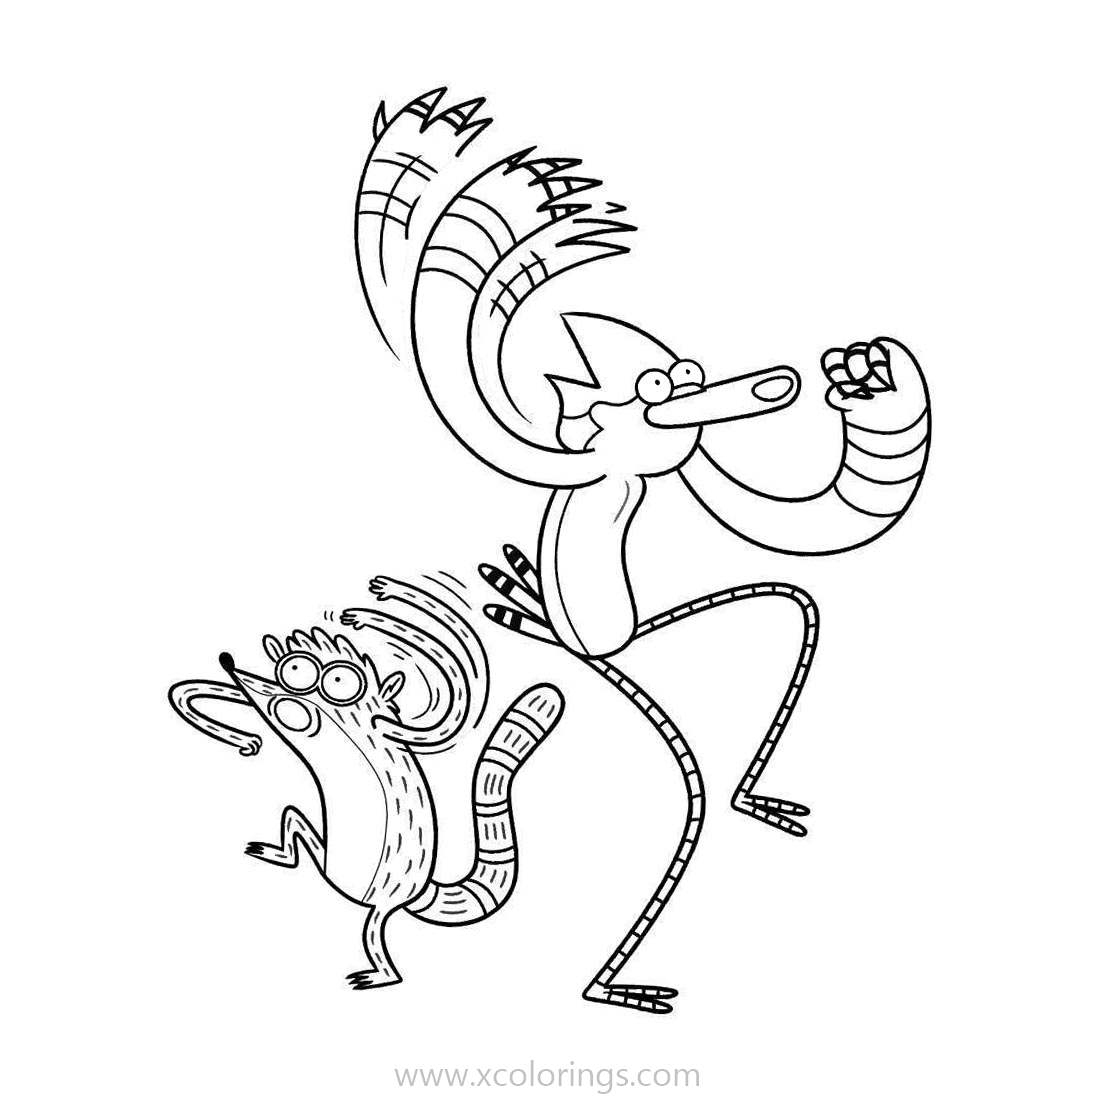 Free Regular Show Coloring Pages Racoon and Blue Jay printable